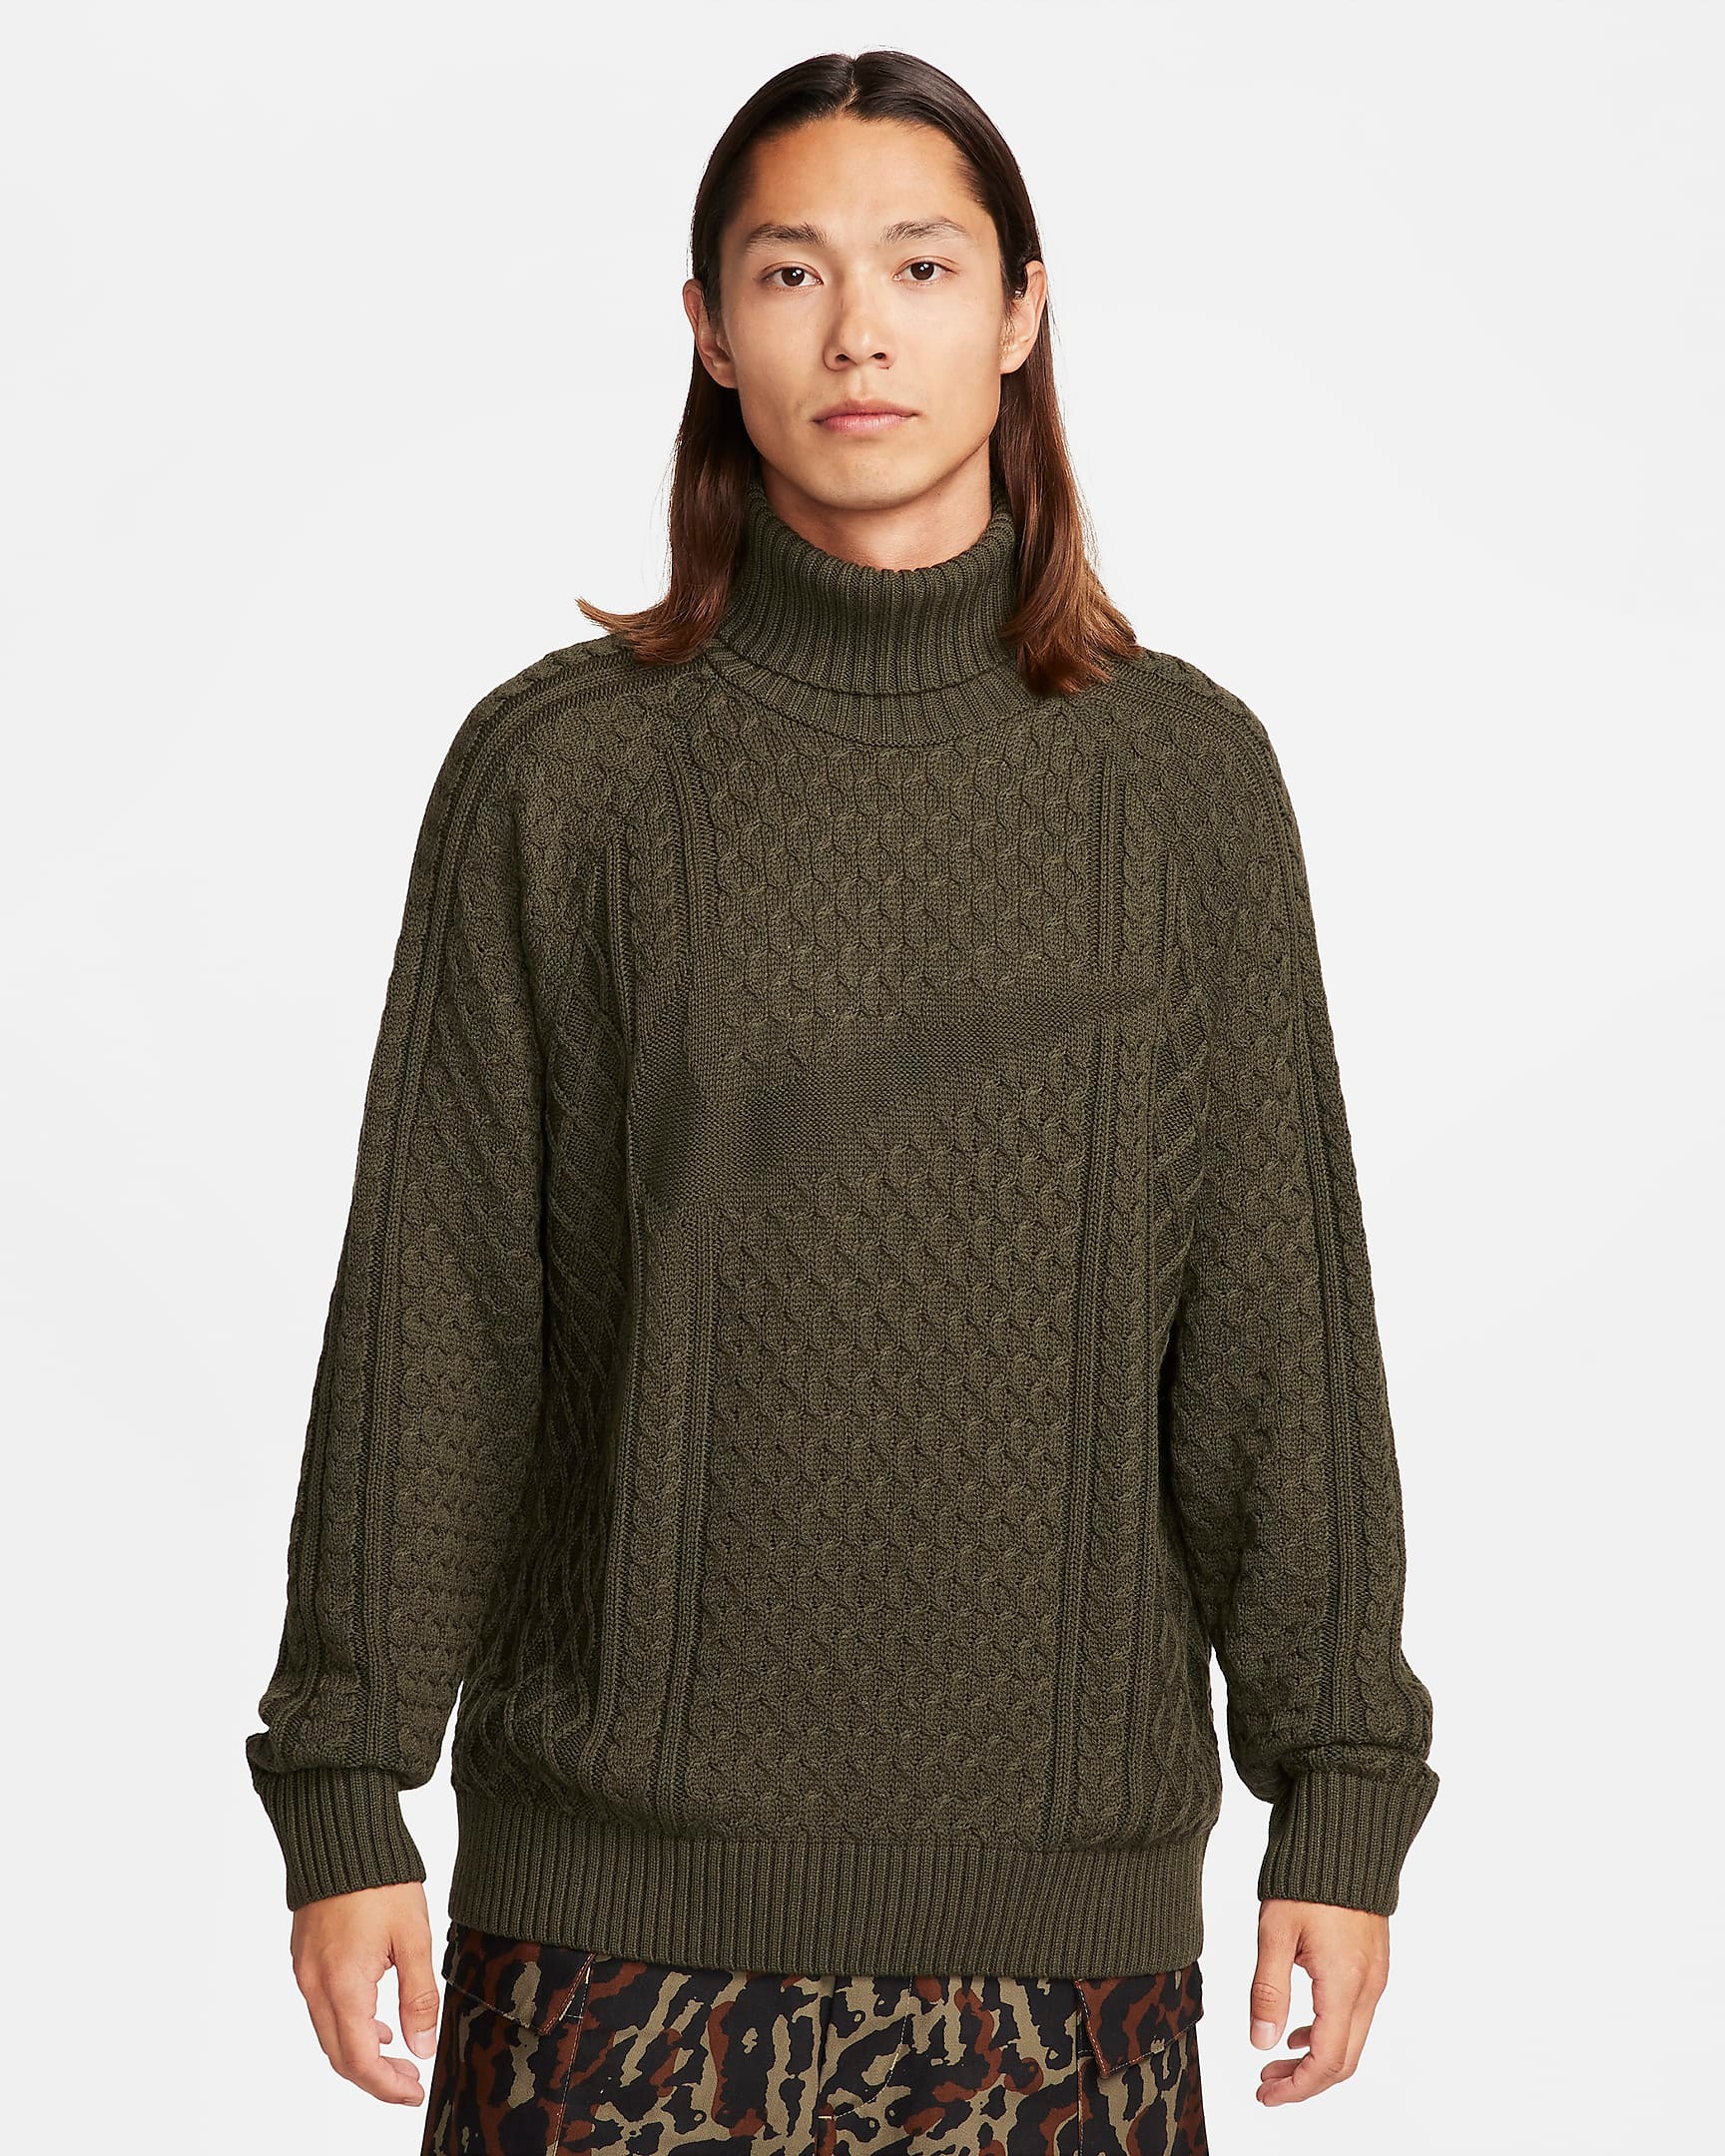 Models wear Nike's cable-knit sweater in white and olive colors